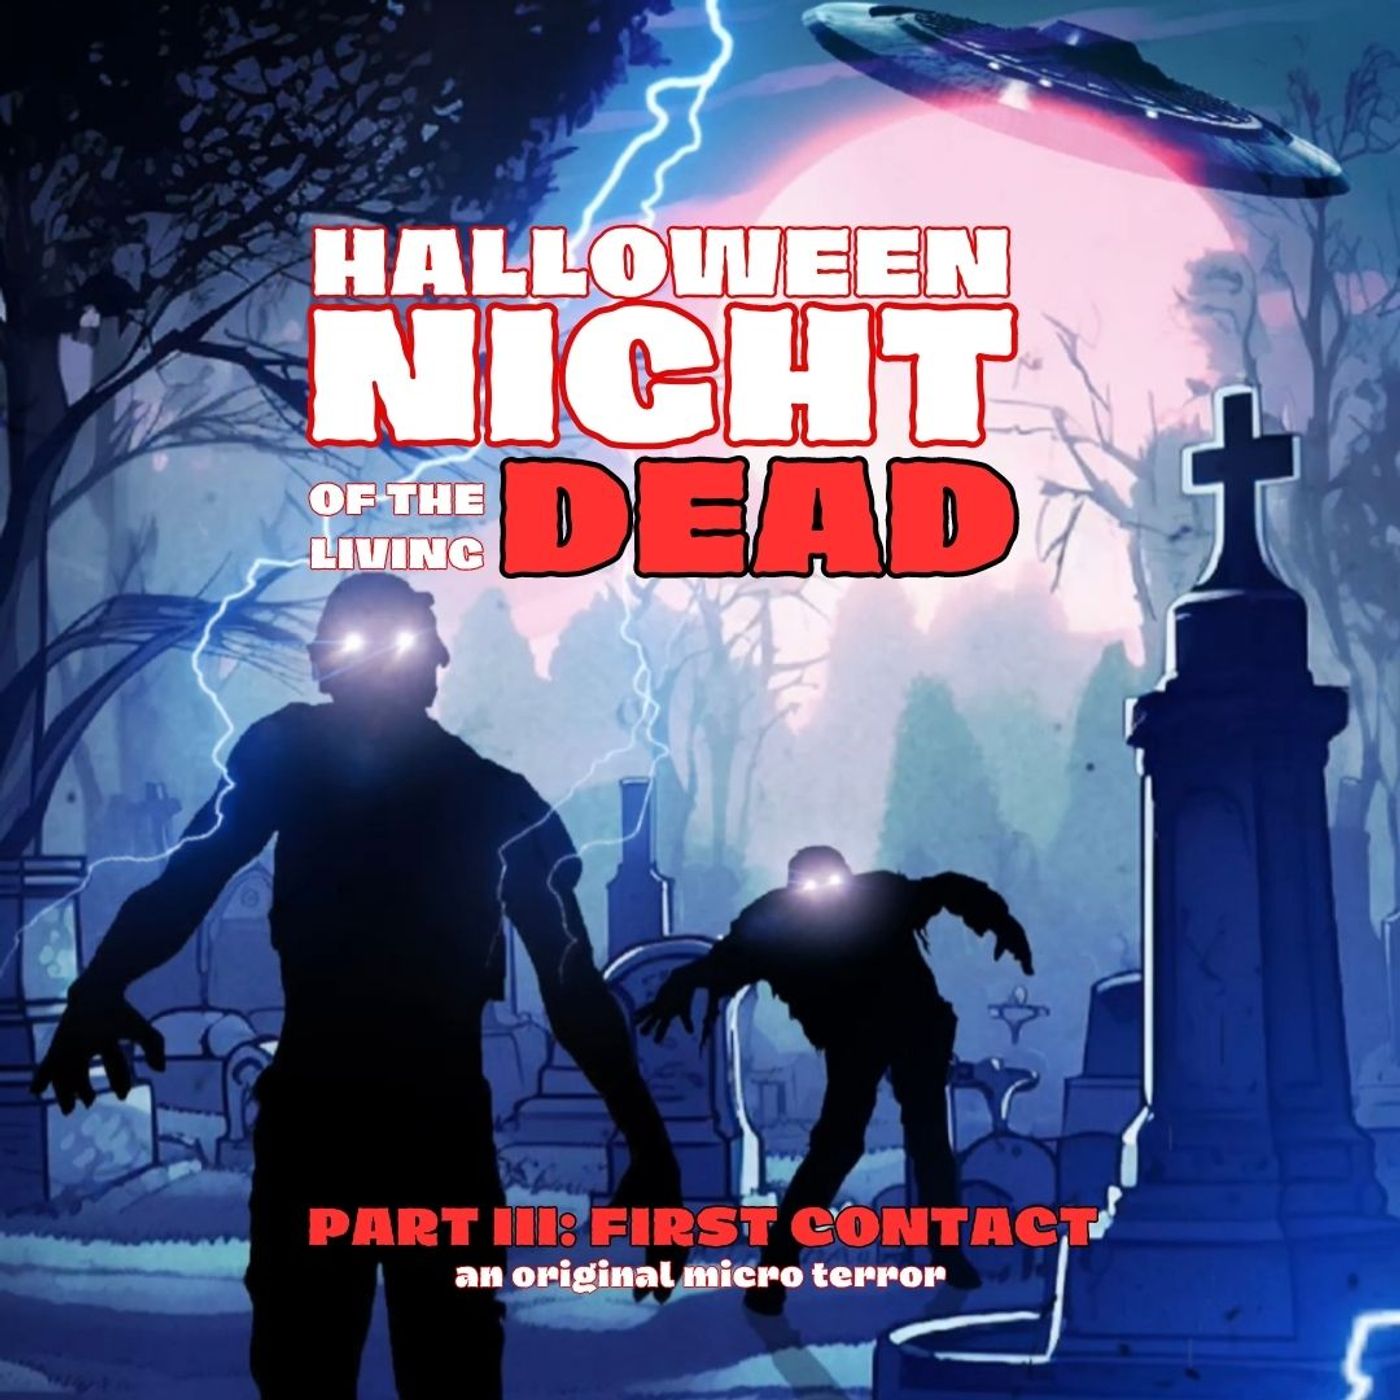 “HALLOWEEN NIGHT OF THE LIVING DEAD, PART 3 of 4: FIRST CONTACT” by Scott Donnelly #MicroTerrors